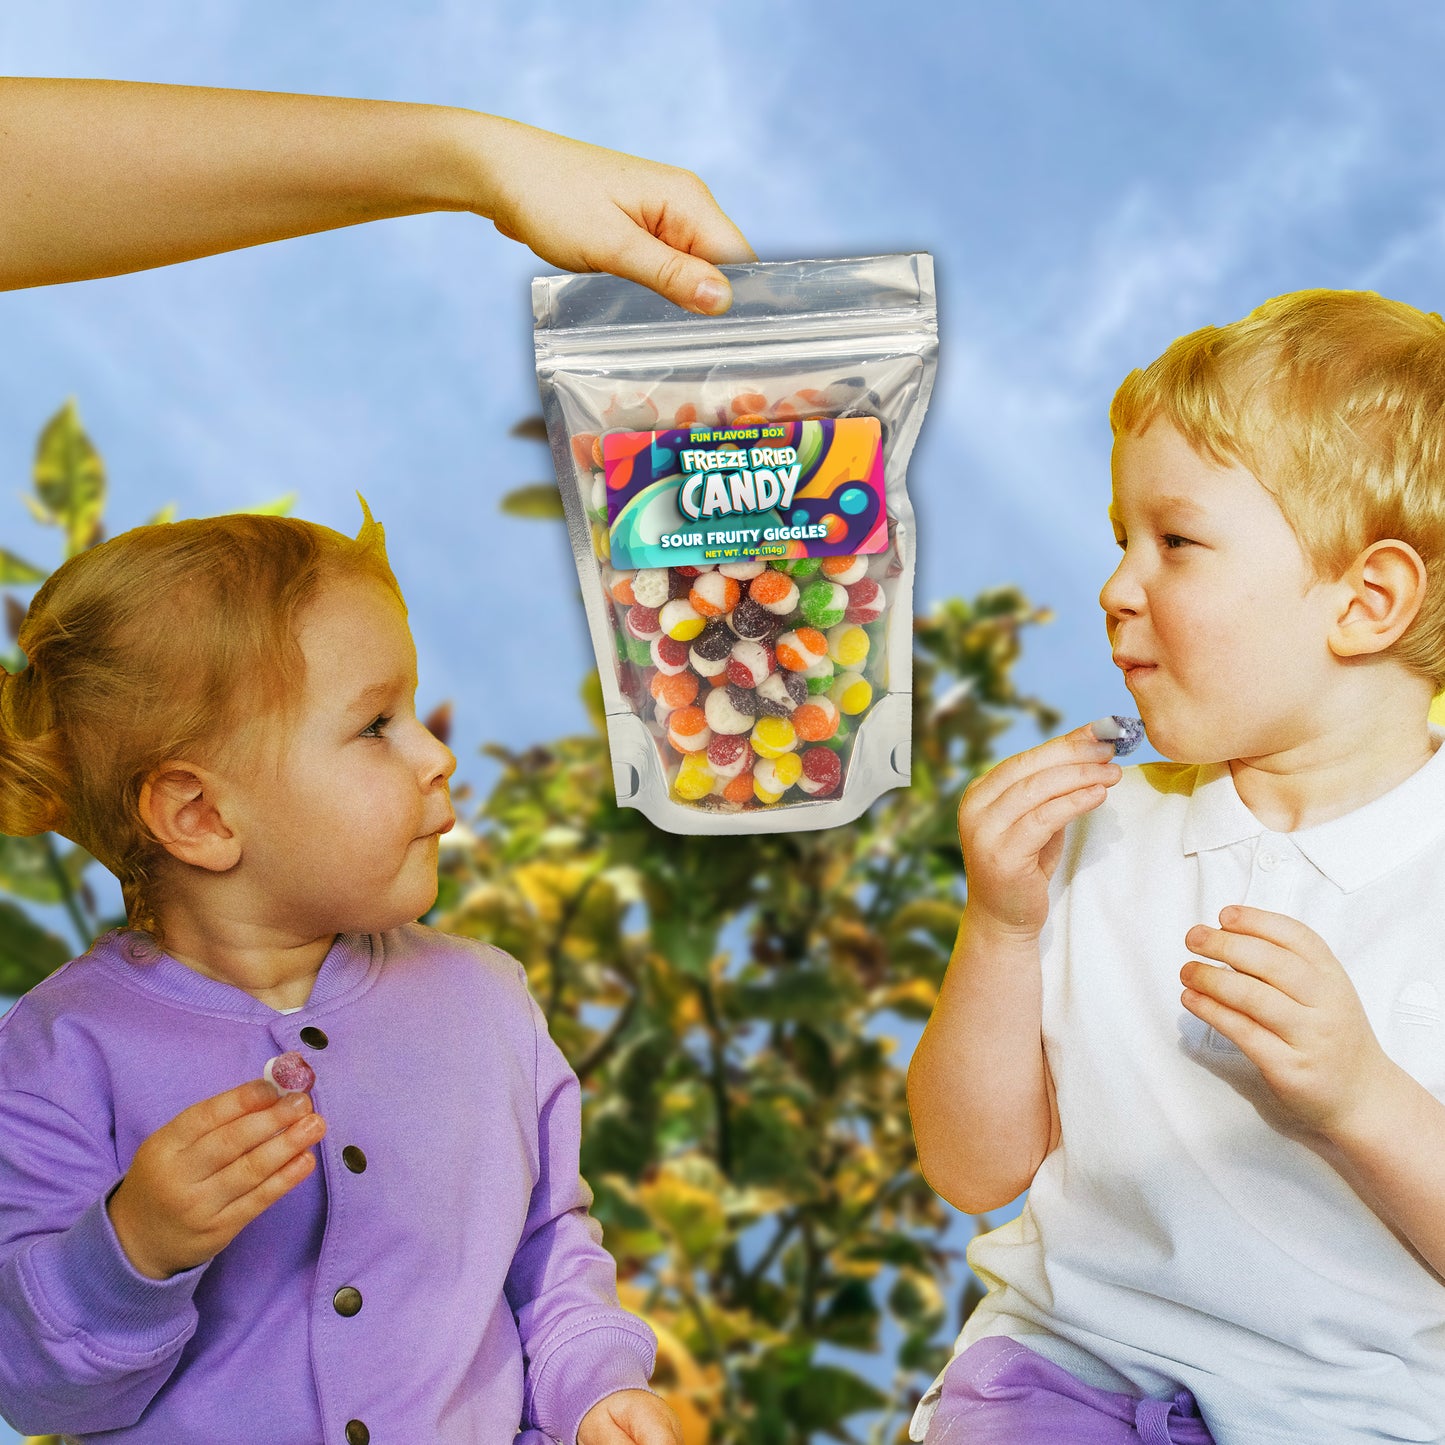 Freeze Dried Candy Sour Fruity Giggles Variety Pack – Crunchy Unique Snack Treats, 4 oz